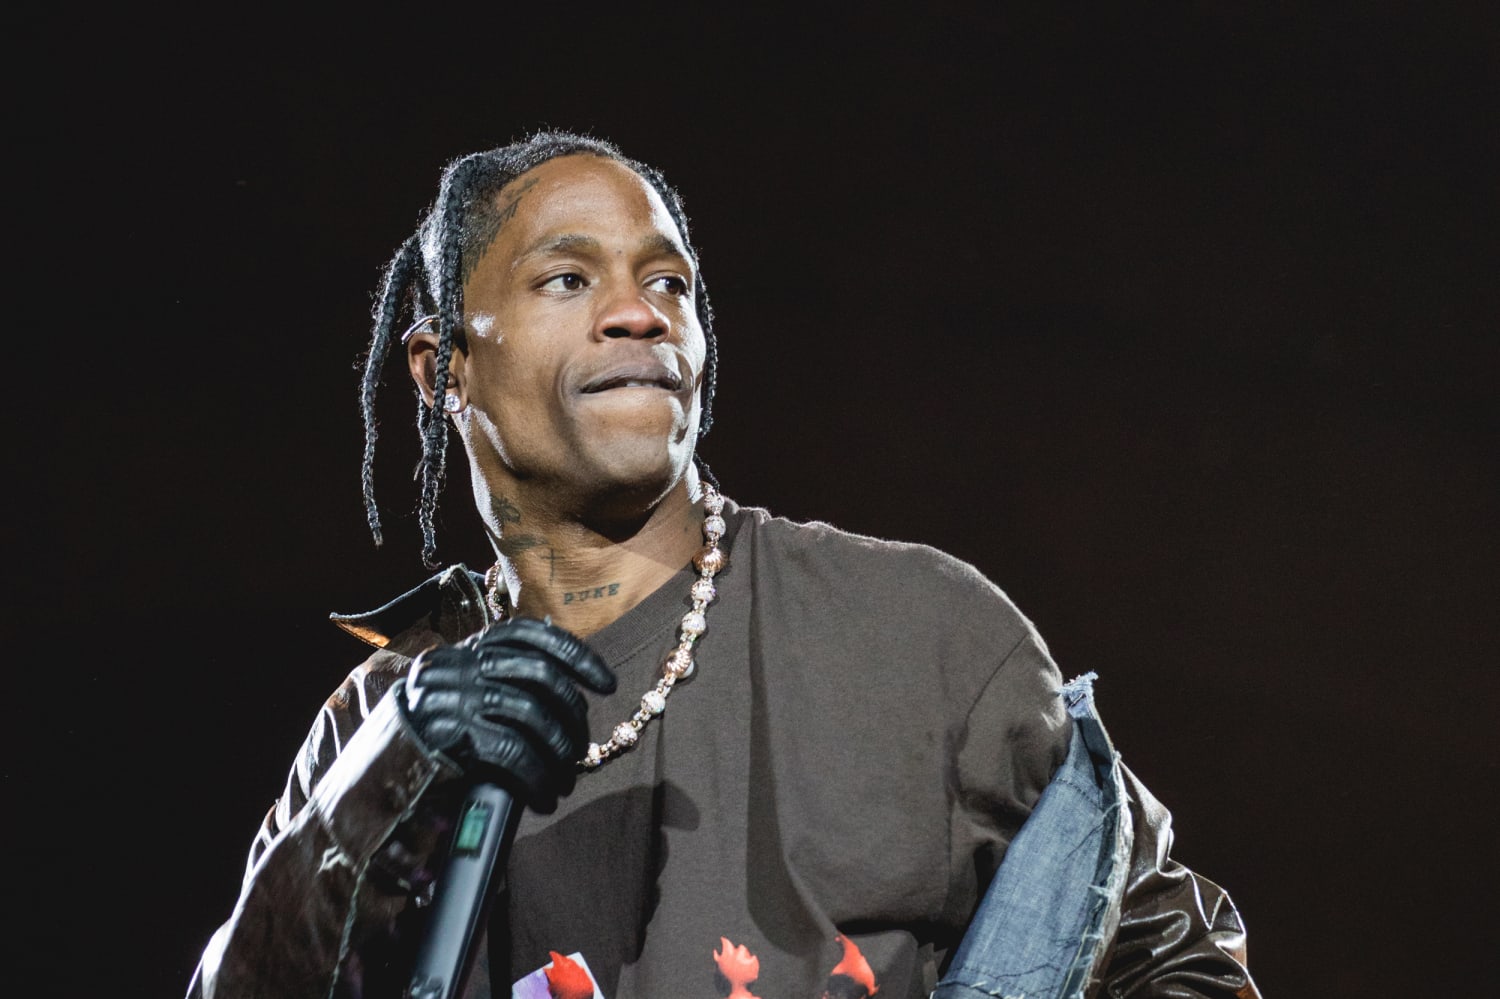 Travis Scott’s Cacti spiked seltzer discontinued after Astroworld disaster